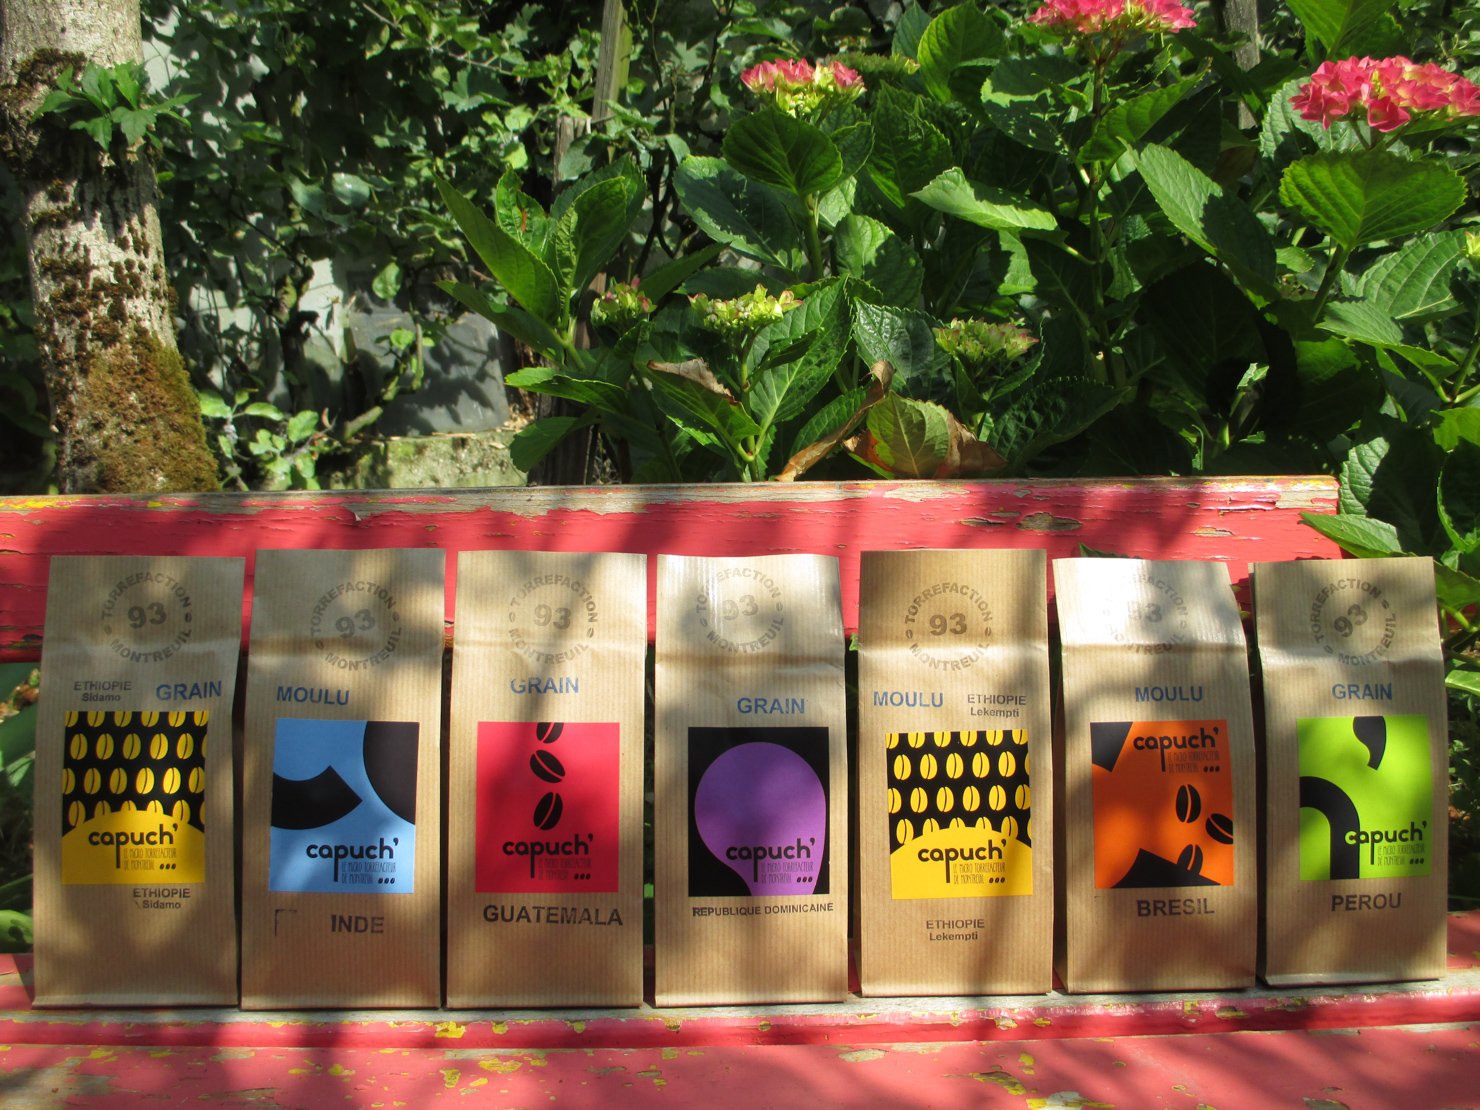 capuch' montreuil france coffee micro roaster market sprudge